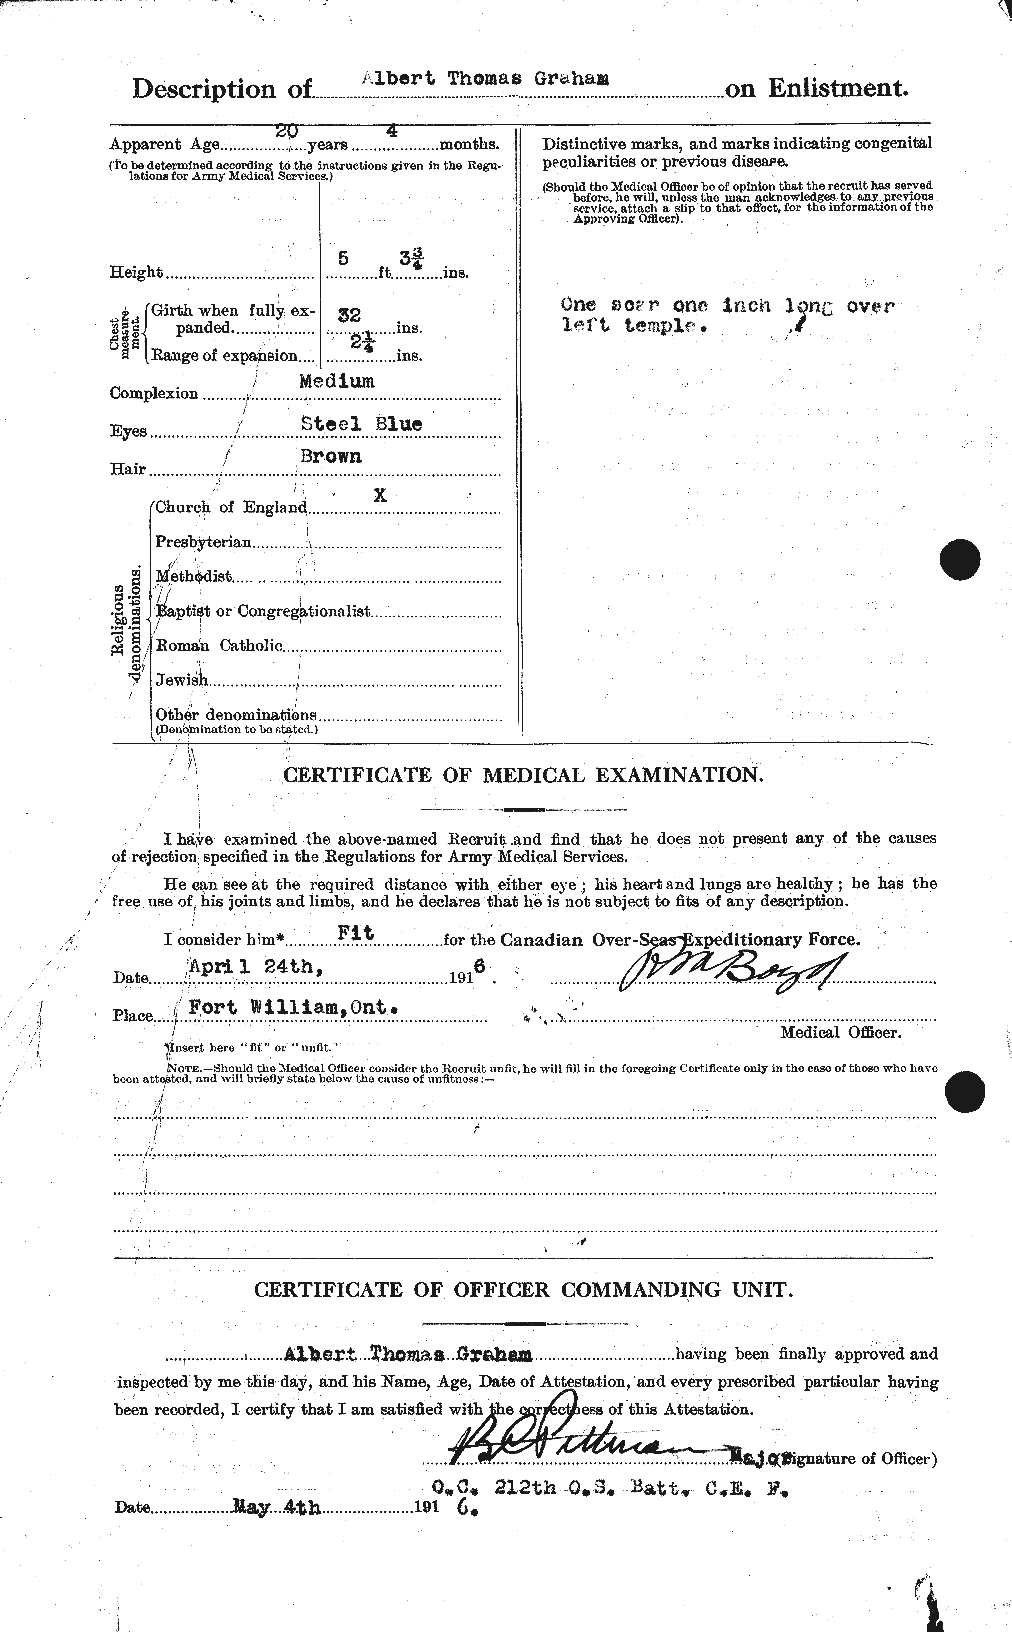 Personnel Records of the First World War - CEF 359571b